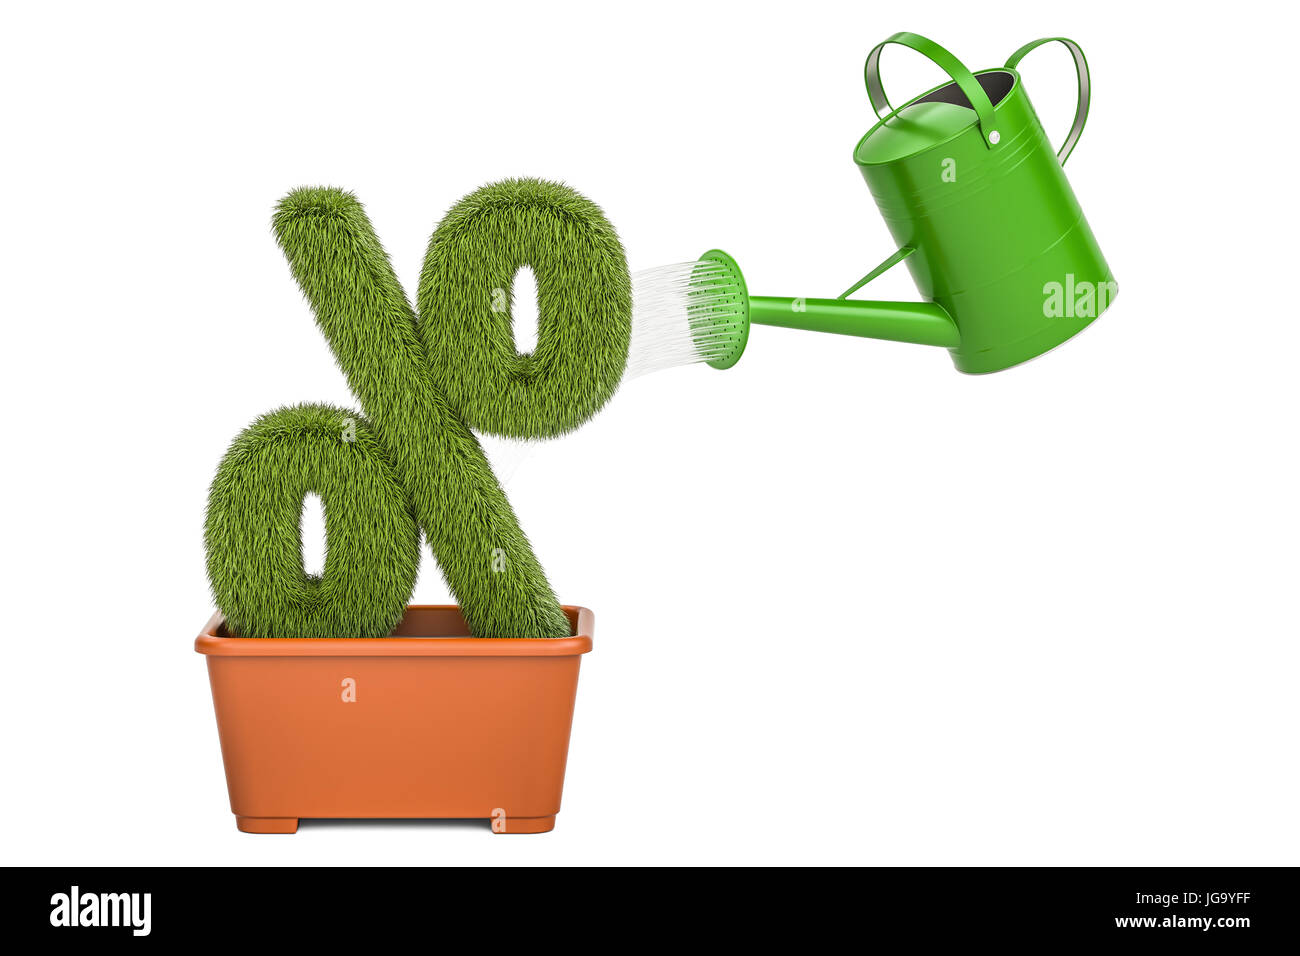 Watering Can Water Grassy Percent Symbol Money Plant Concept 3d